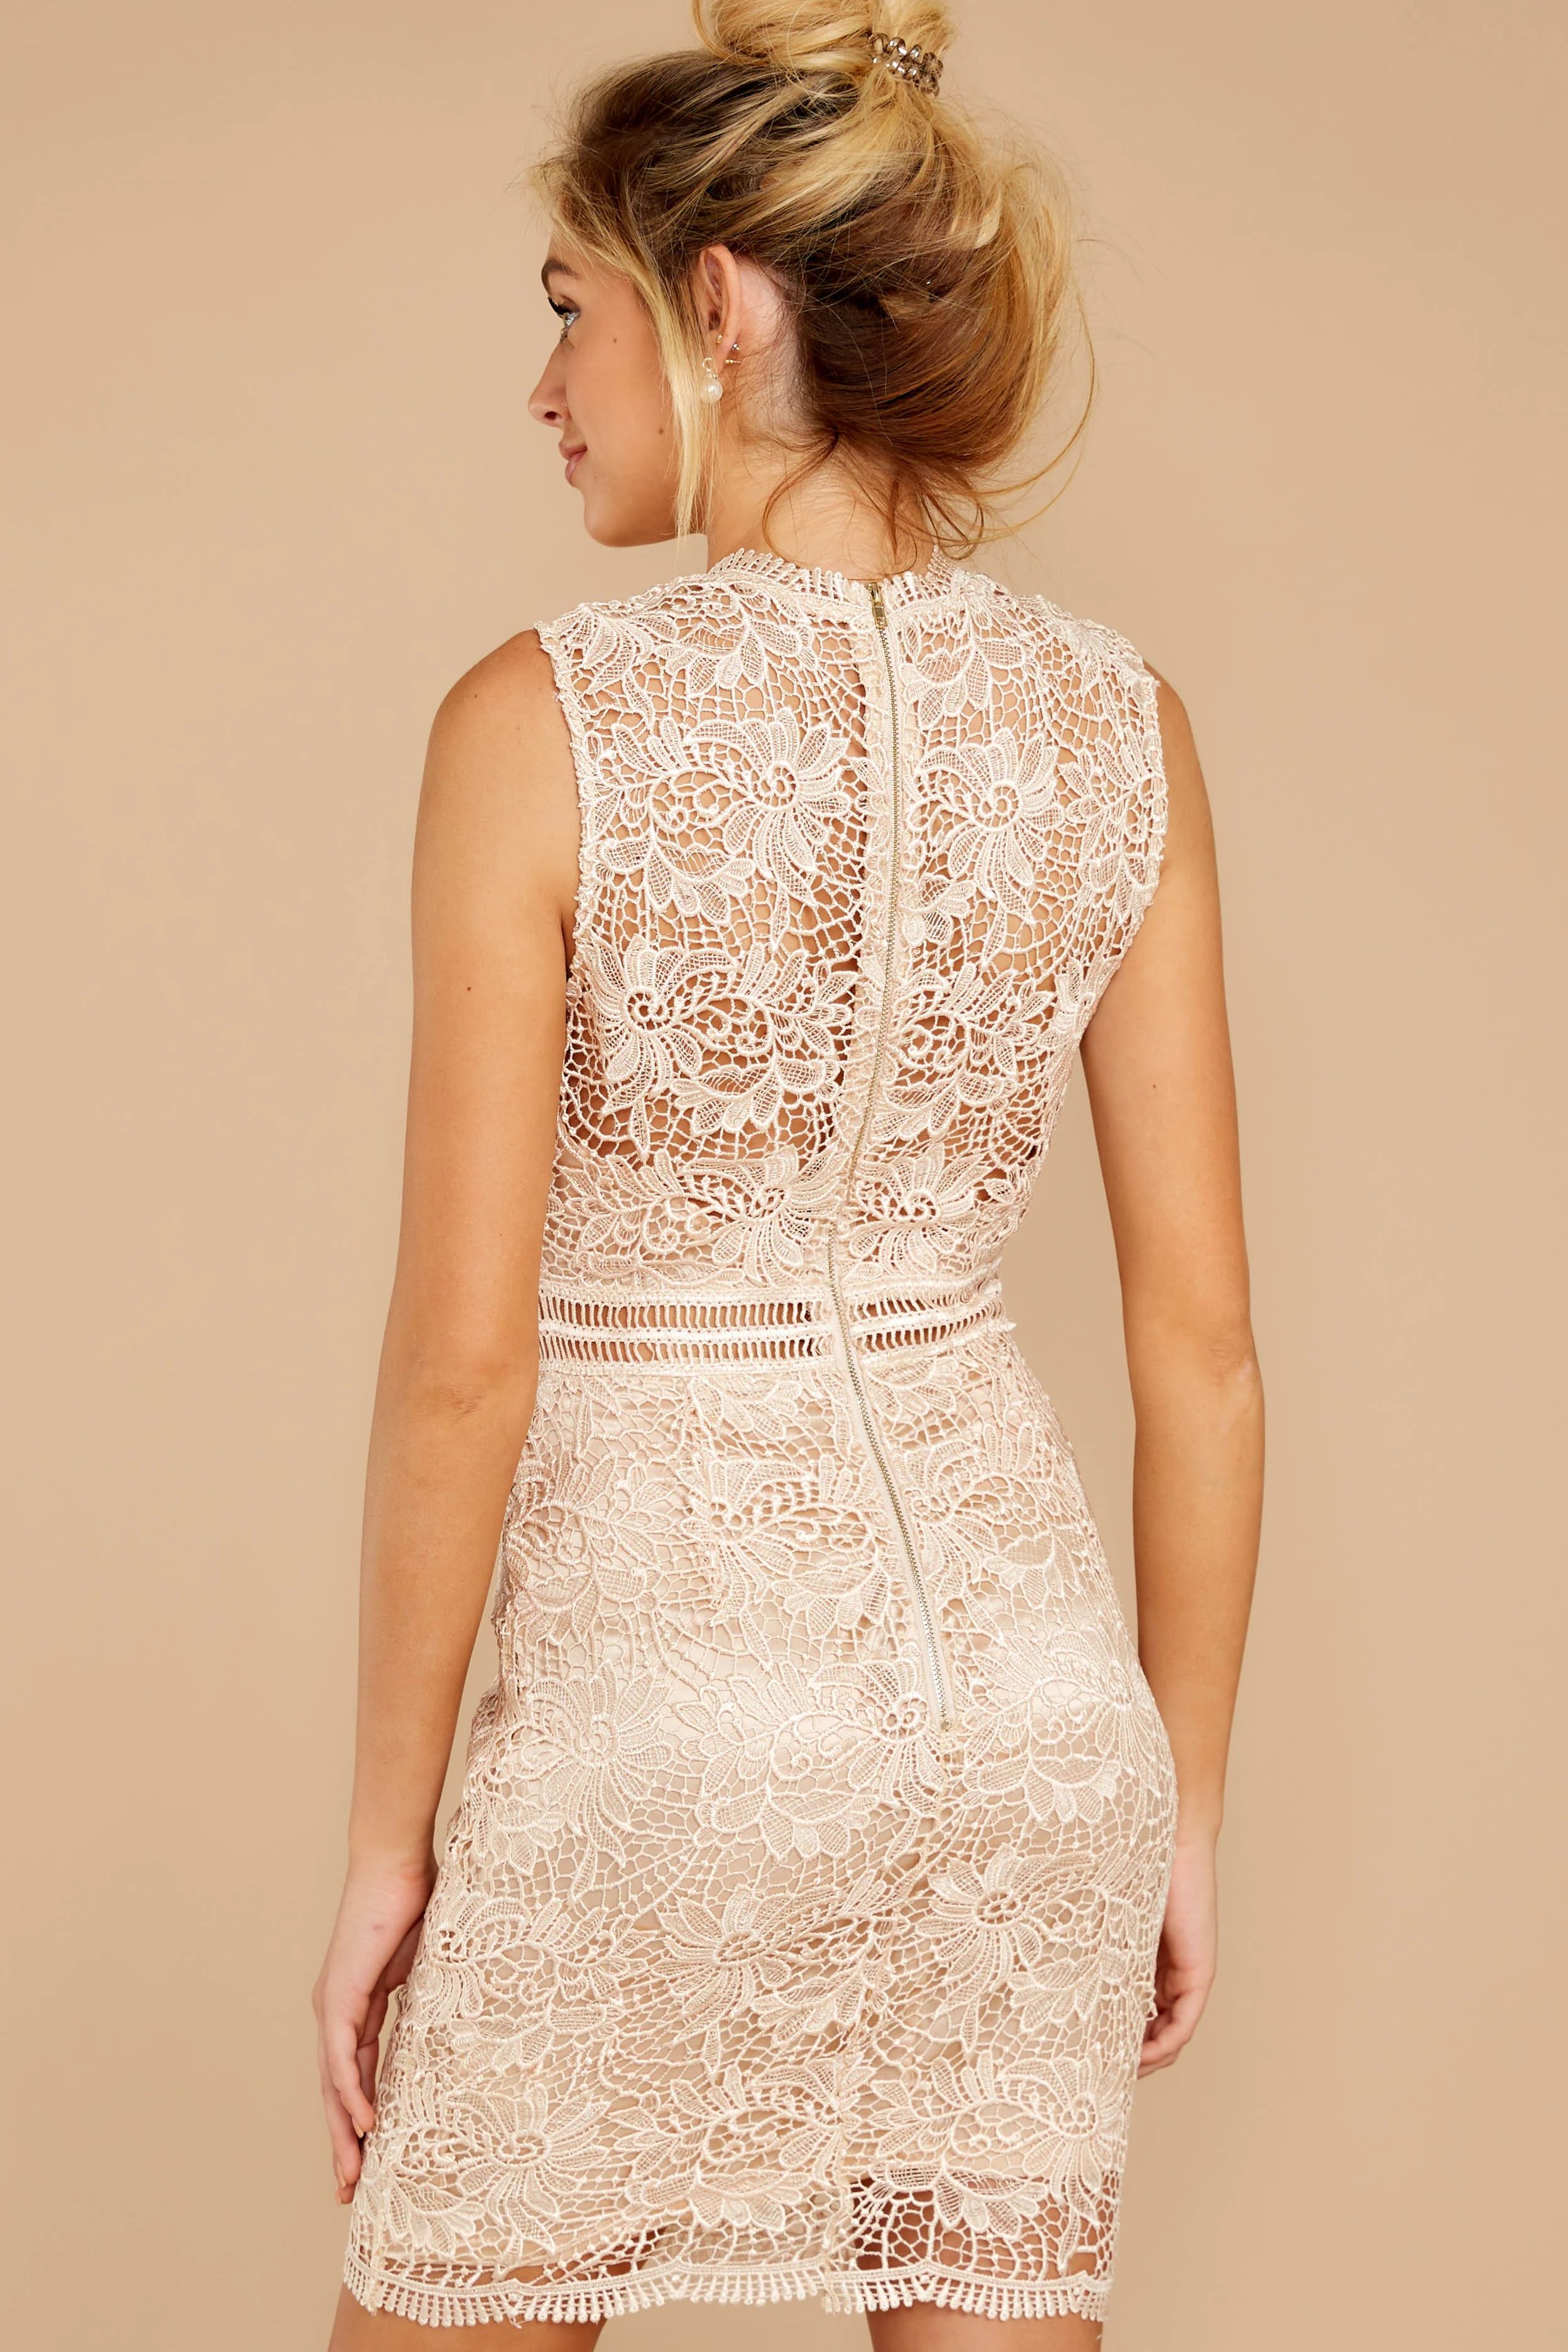 Whispered Thoughts Beige Lace Dress | Red Dress 